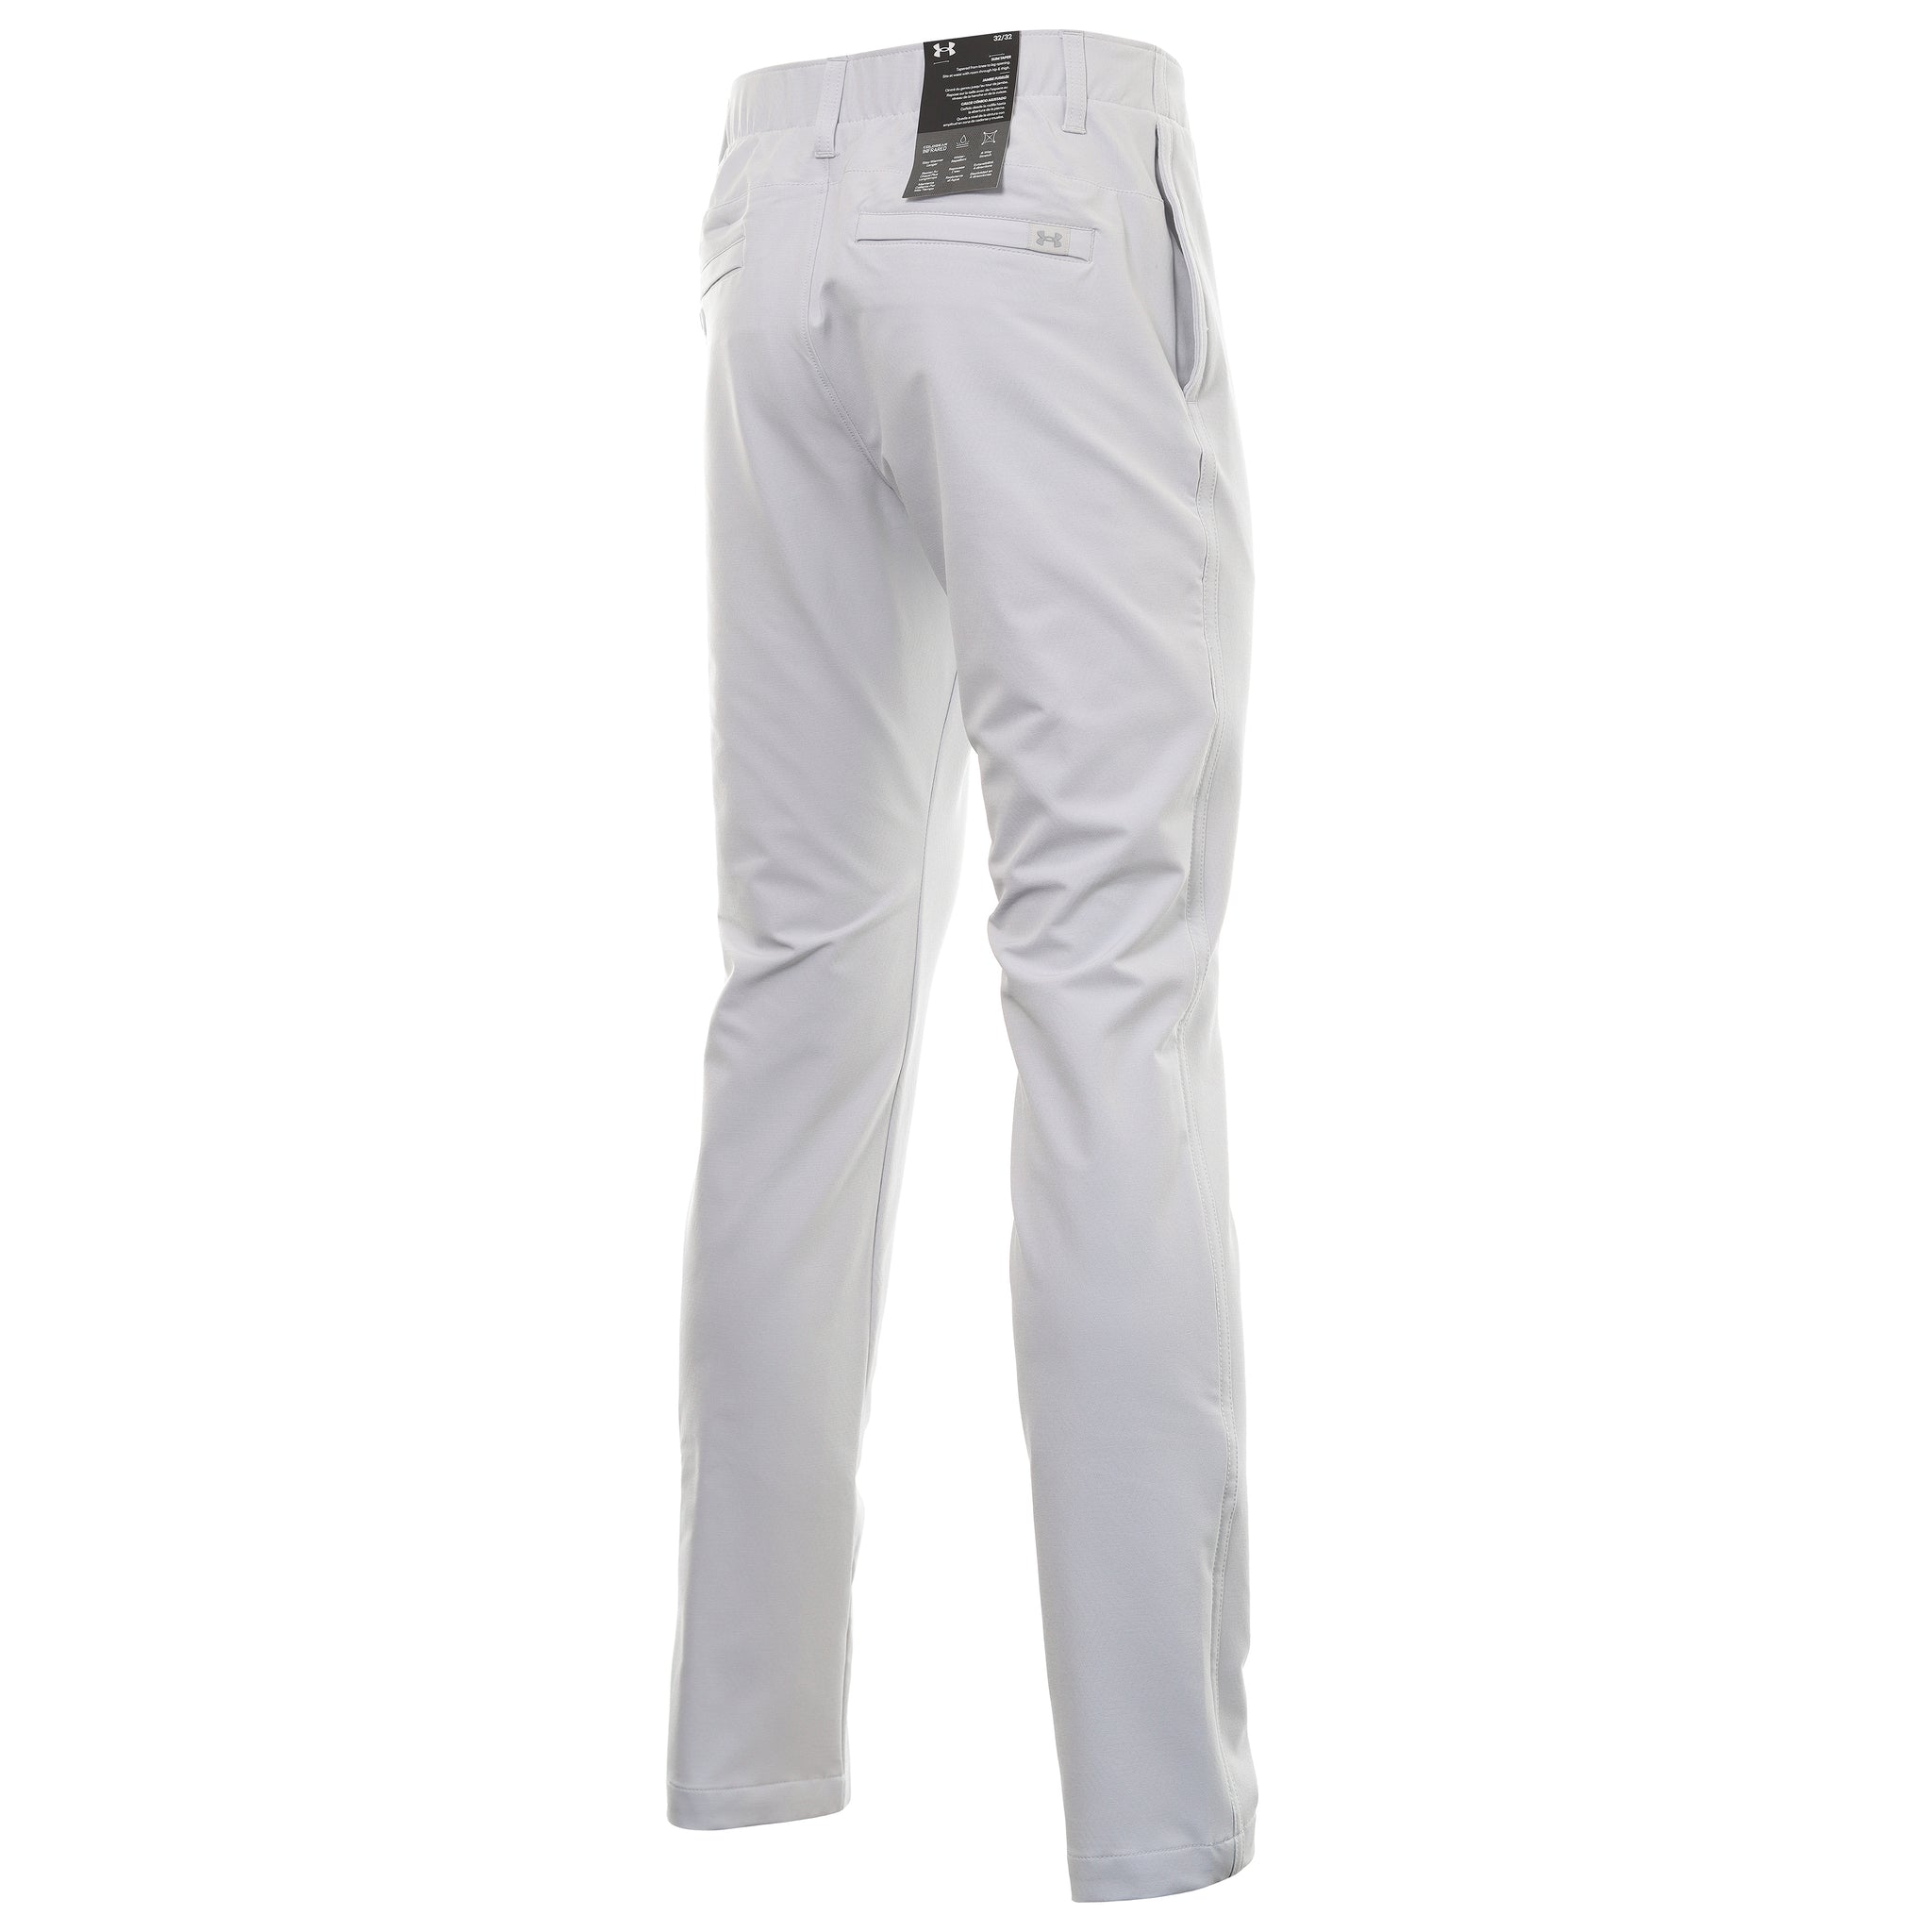 Under Armour Golf CGI Pants 1366289 Halo Grey Function18 Restrictedgs